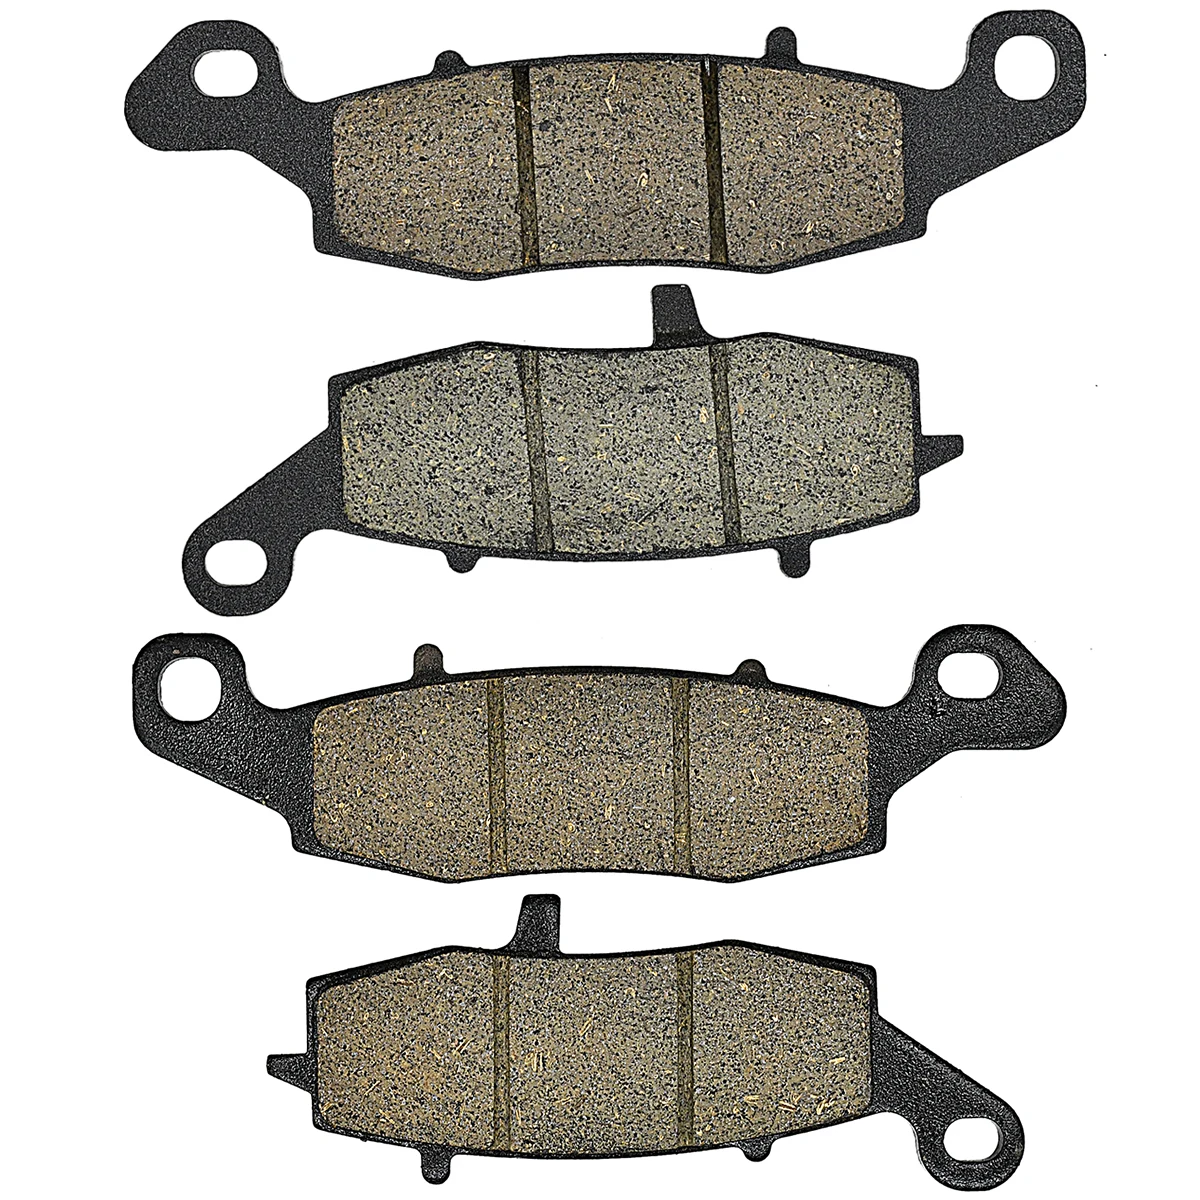 

Cyleto Motorcycle Front Rear Brake Pads for Kawasaki Vulcan Nomad VN1500 VN1600 VN1700 VN 1500 1600 1700 Classic Tourer Vaquero